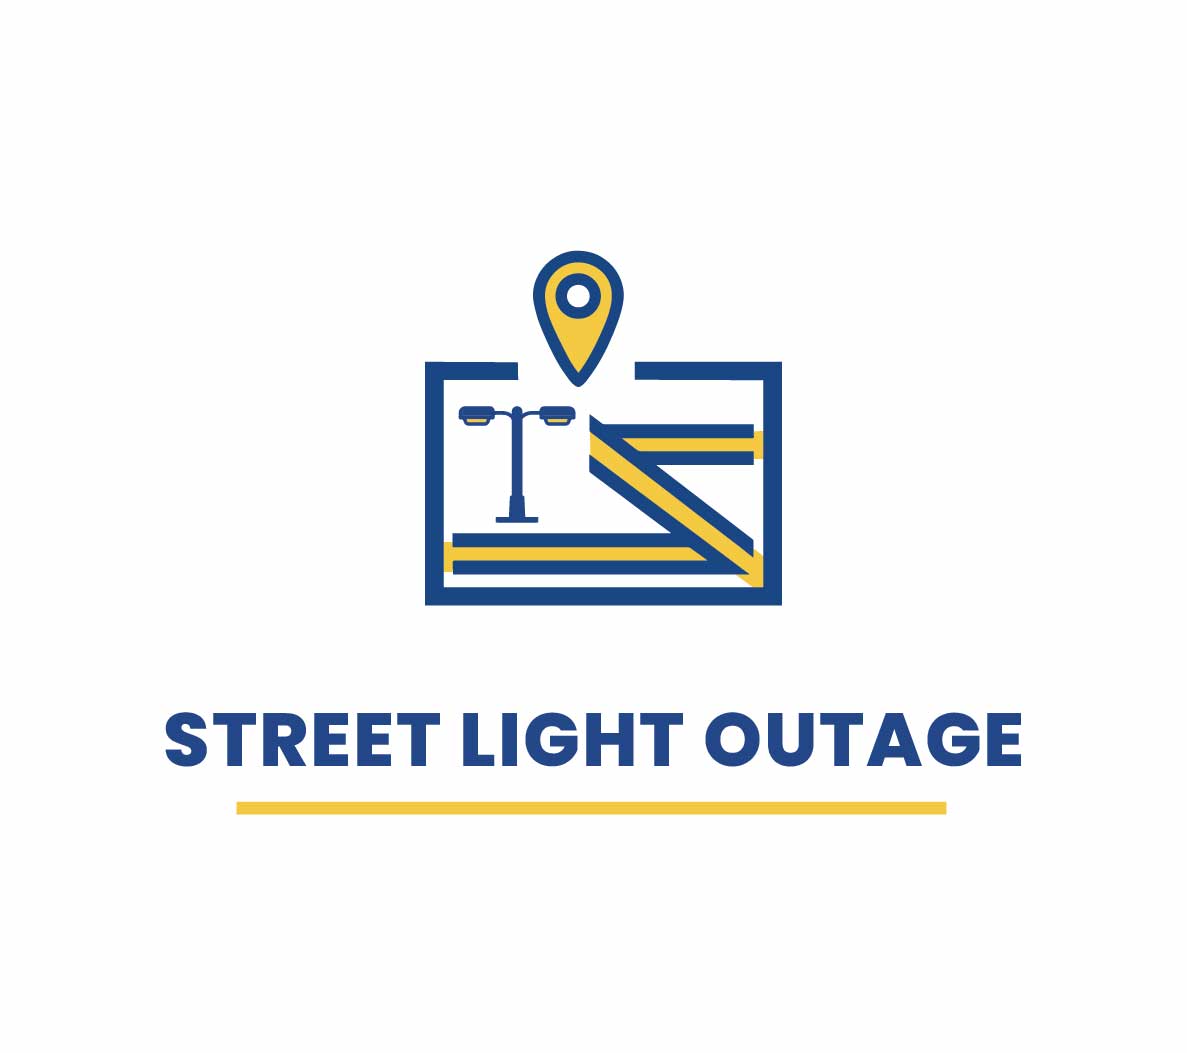 Click here to Street Light Outage